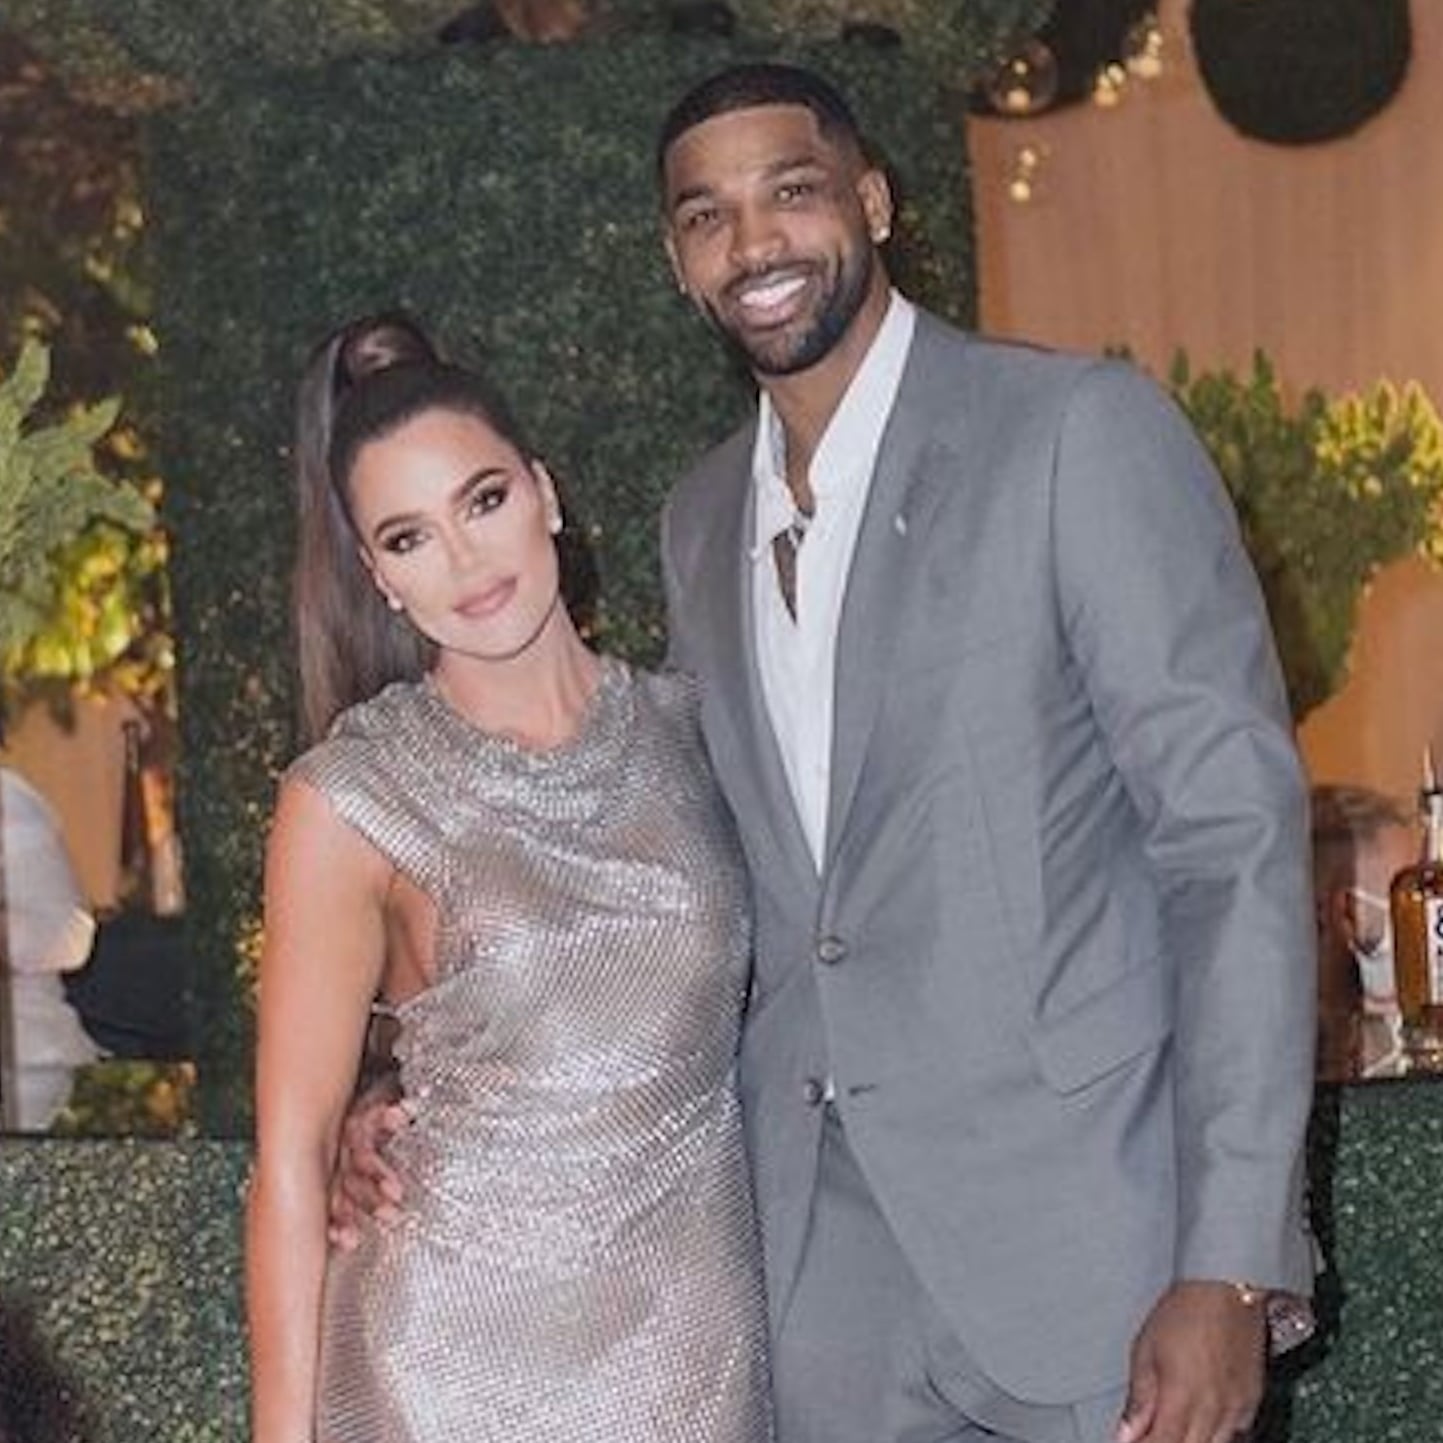 Who Khloe Kardashian Is Dating After Tristan Thompson Breakup